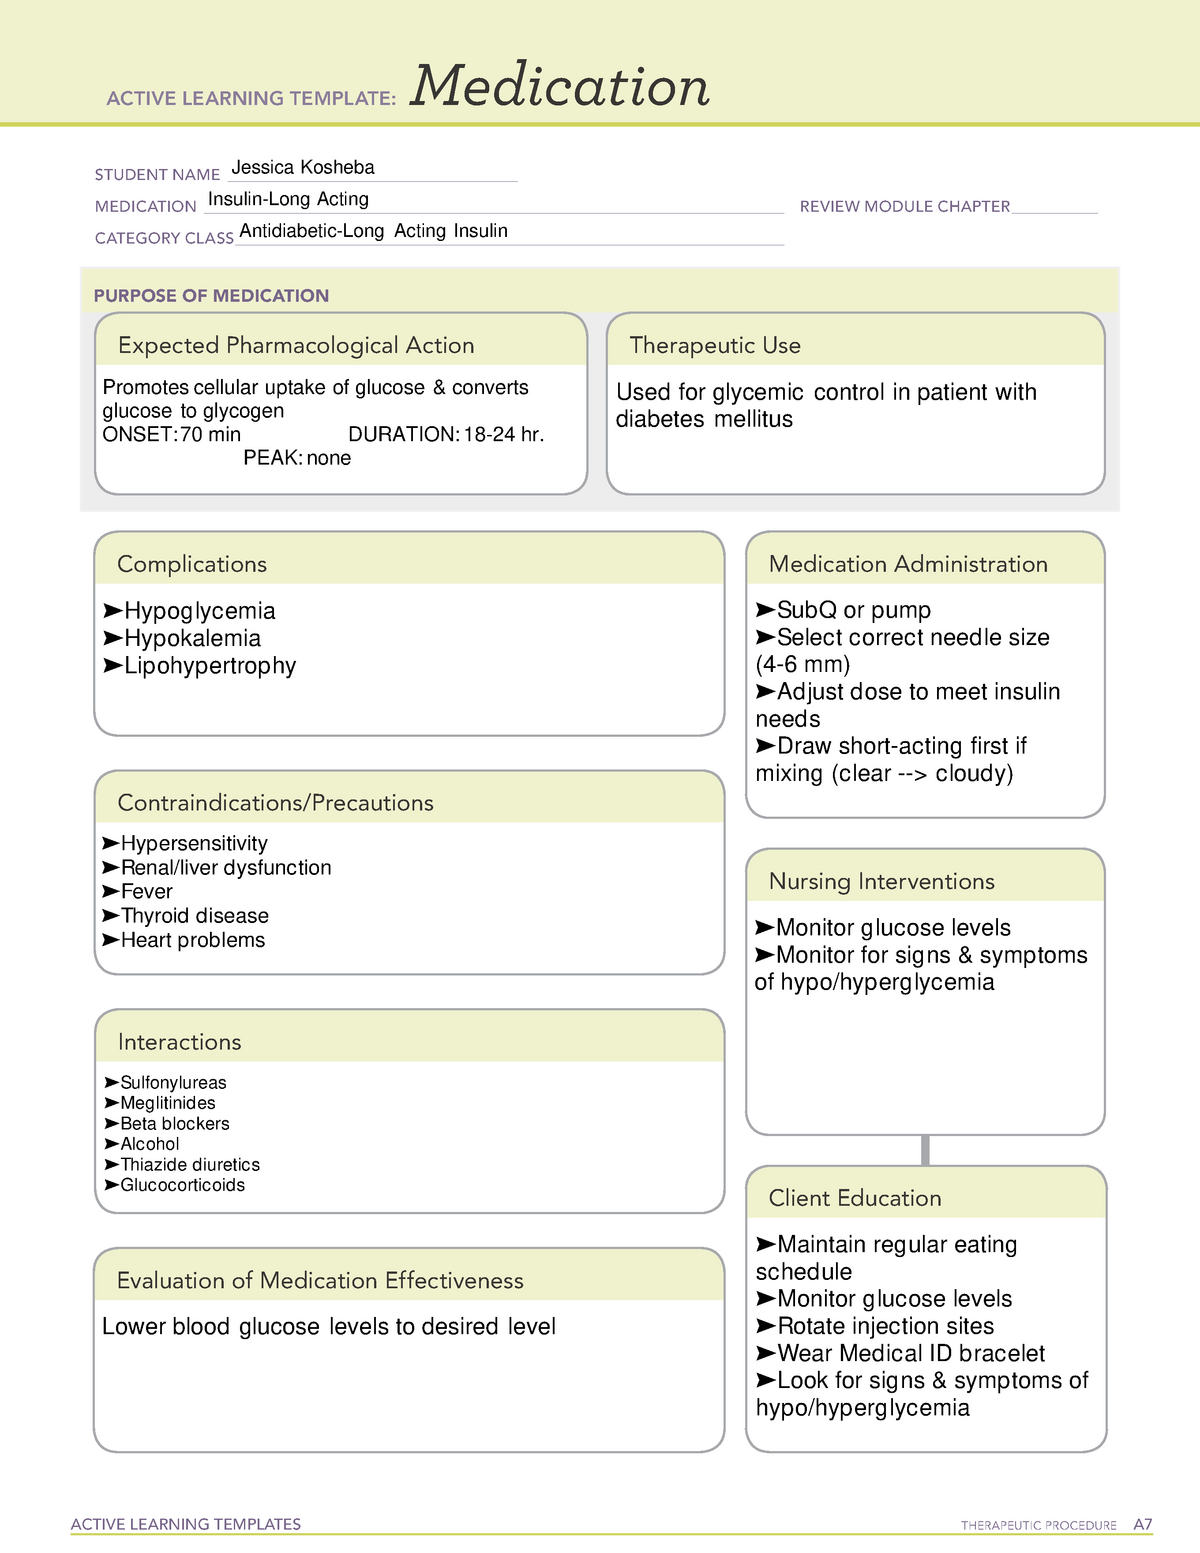 ati-medication-on-long-acting-insulin-active-learning-templates-therapeutic-procedure-a